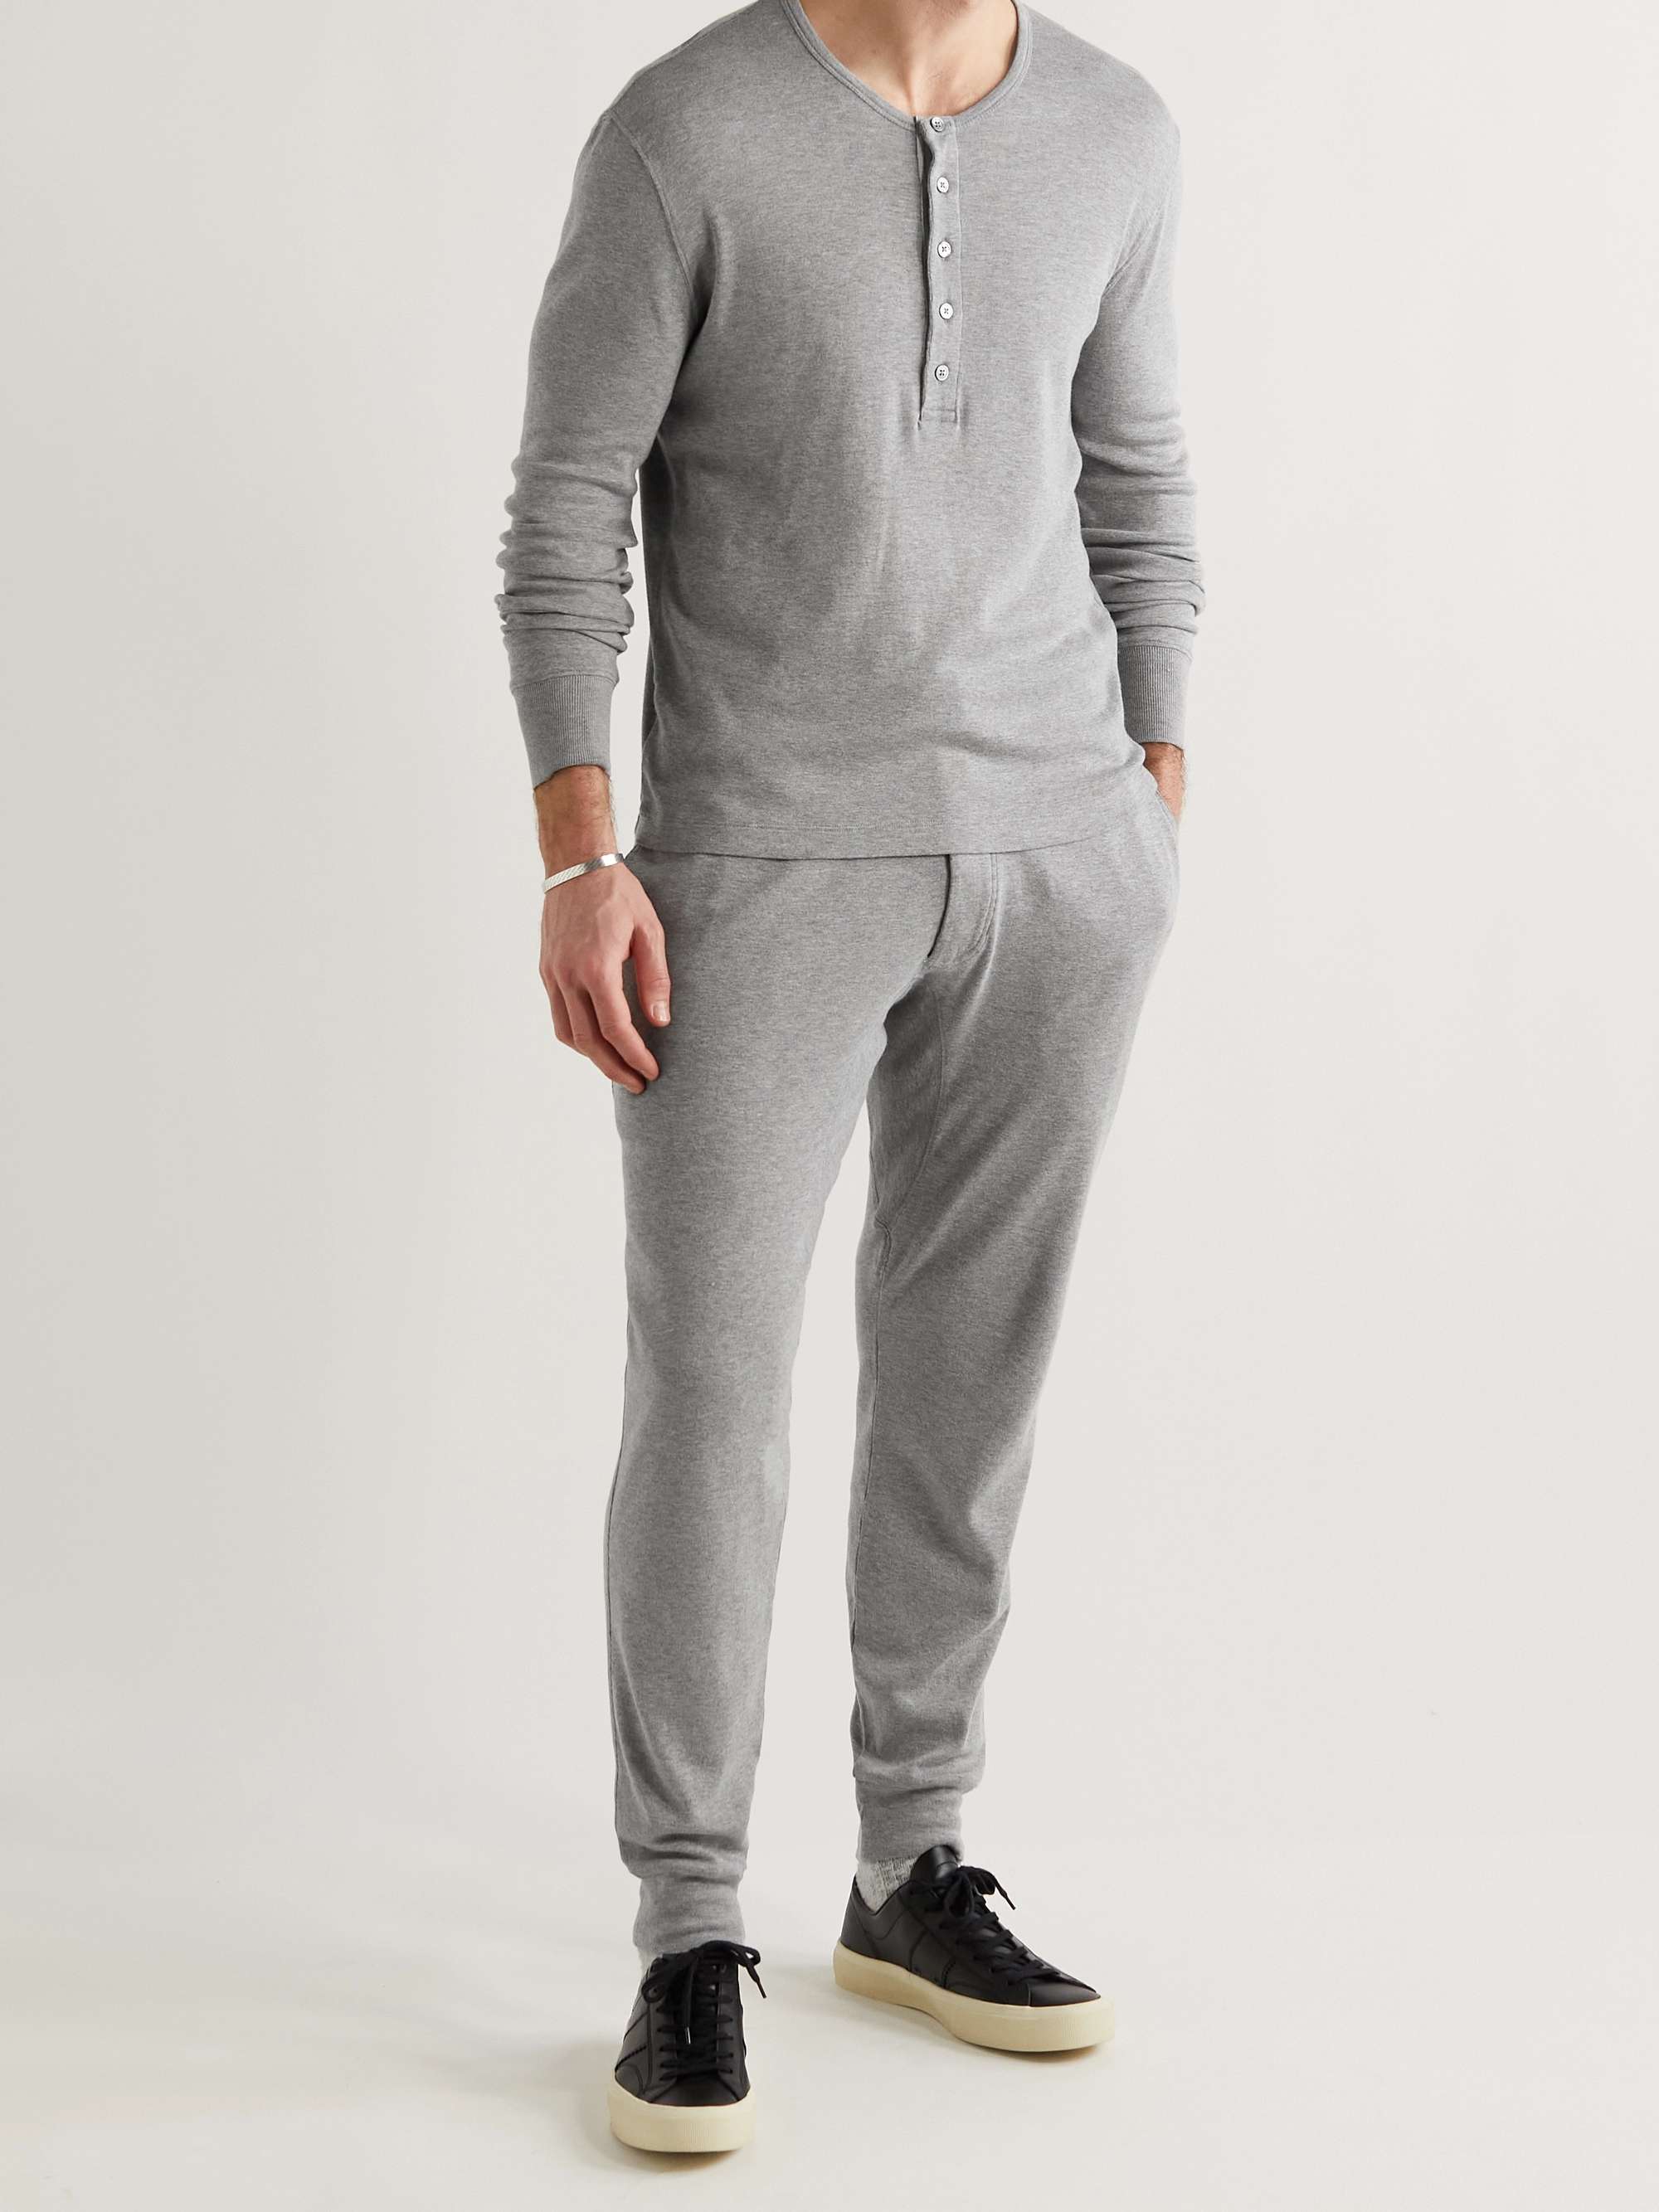 TOM FORD Tapered Brushed Cotton and Modal-Blend Jersey Sweatpants